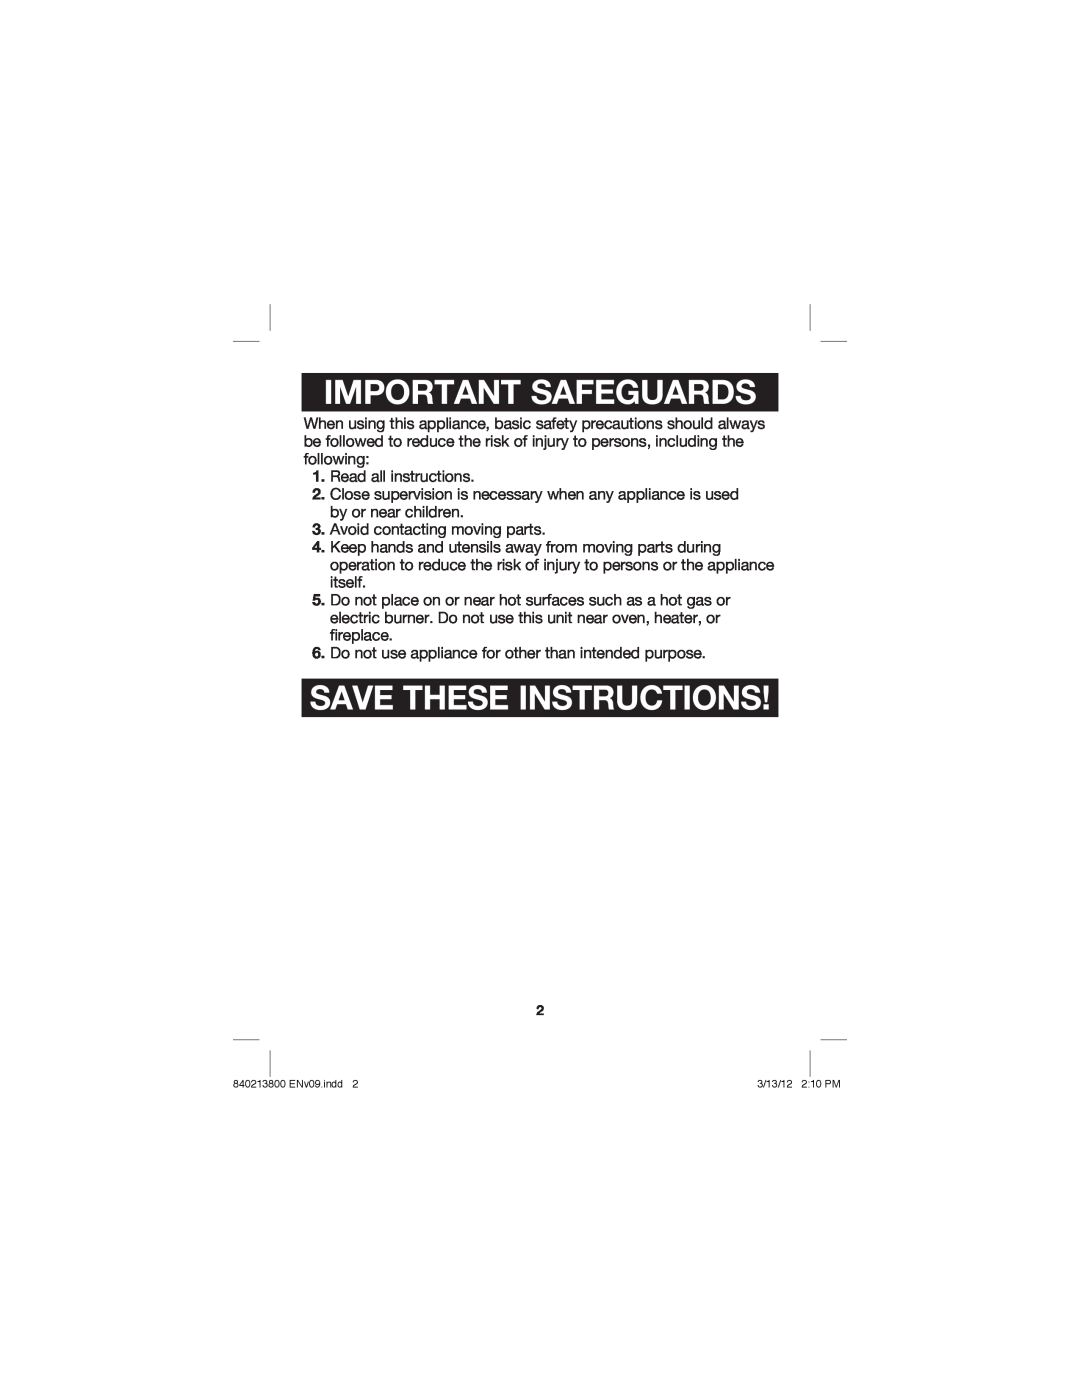 Hamilton Beach Jar Opener, 840213800 manual Important Safeguards, Save These Instructions 